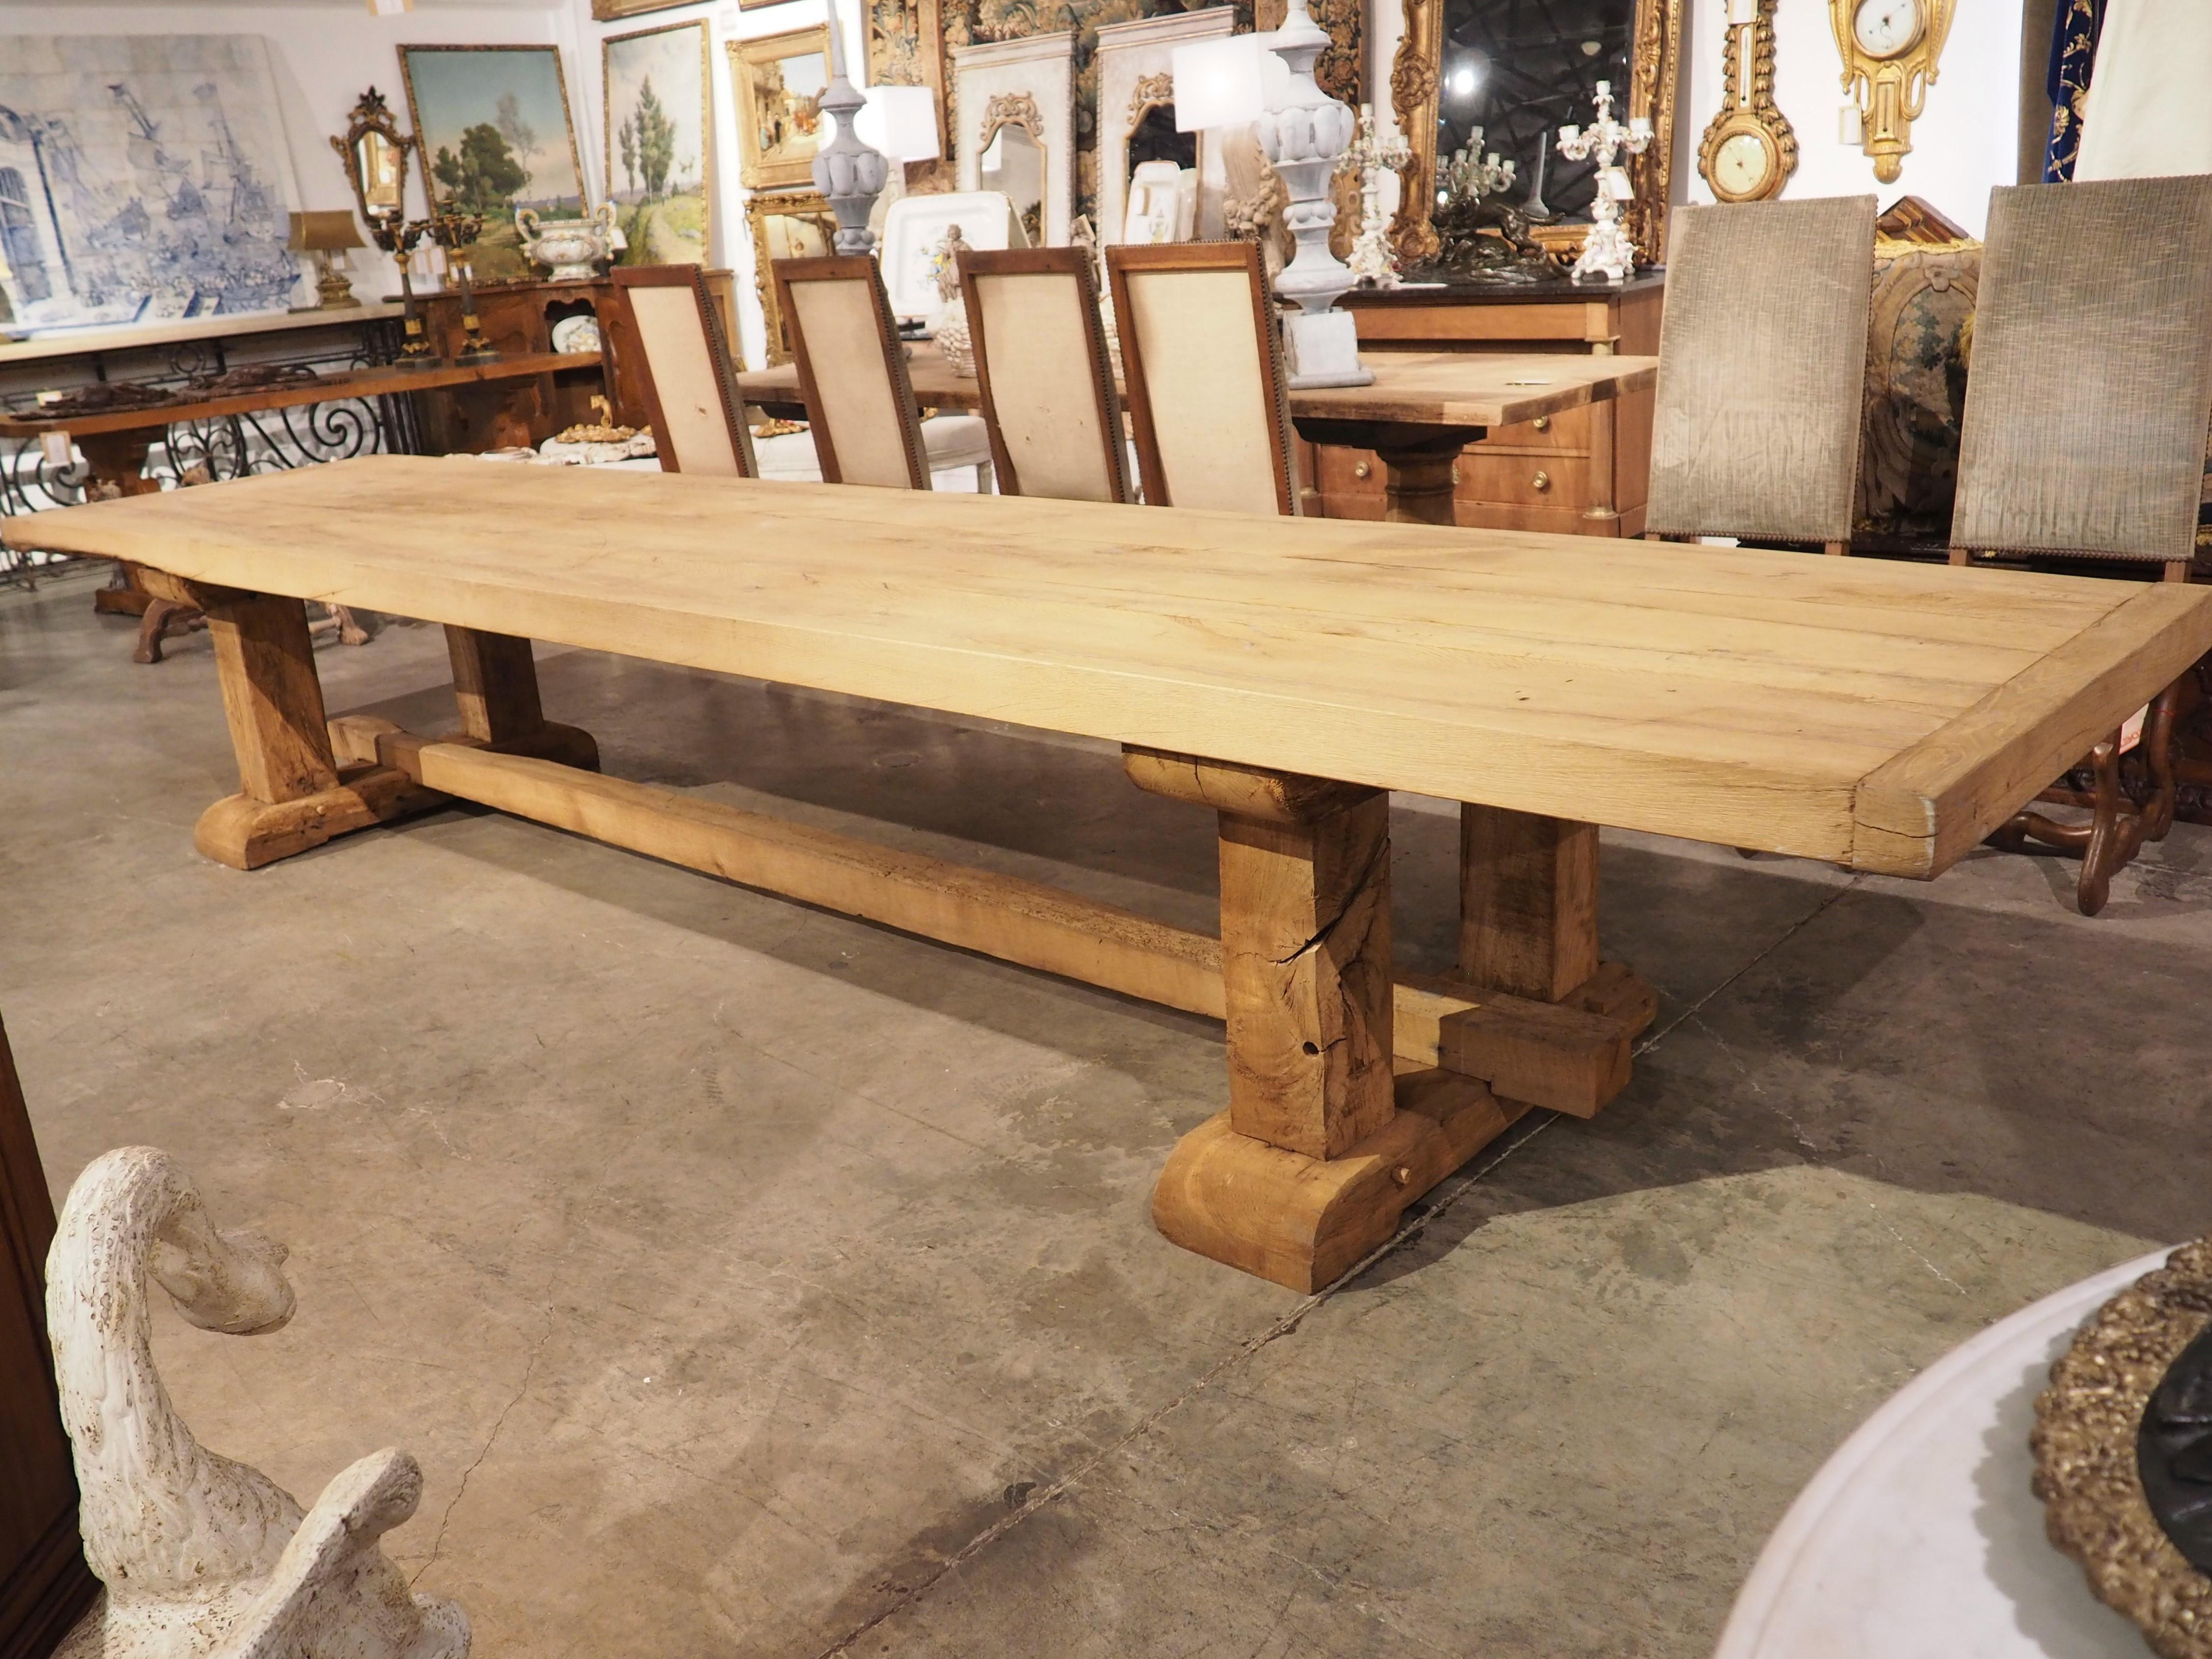 French Monumental Bleached Oak Dining Table from France, Early to Mid 1900s